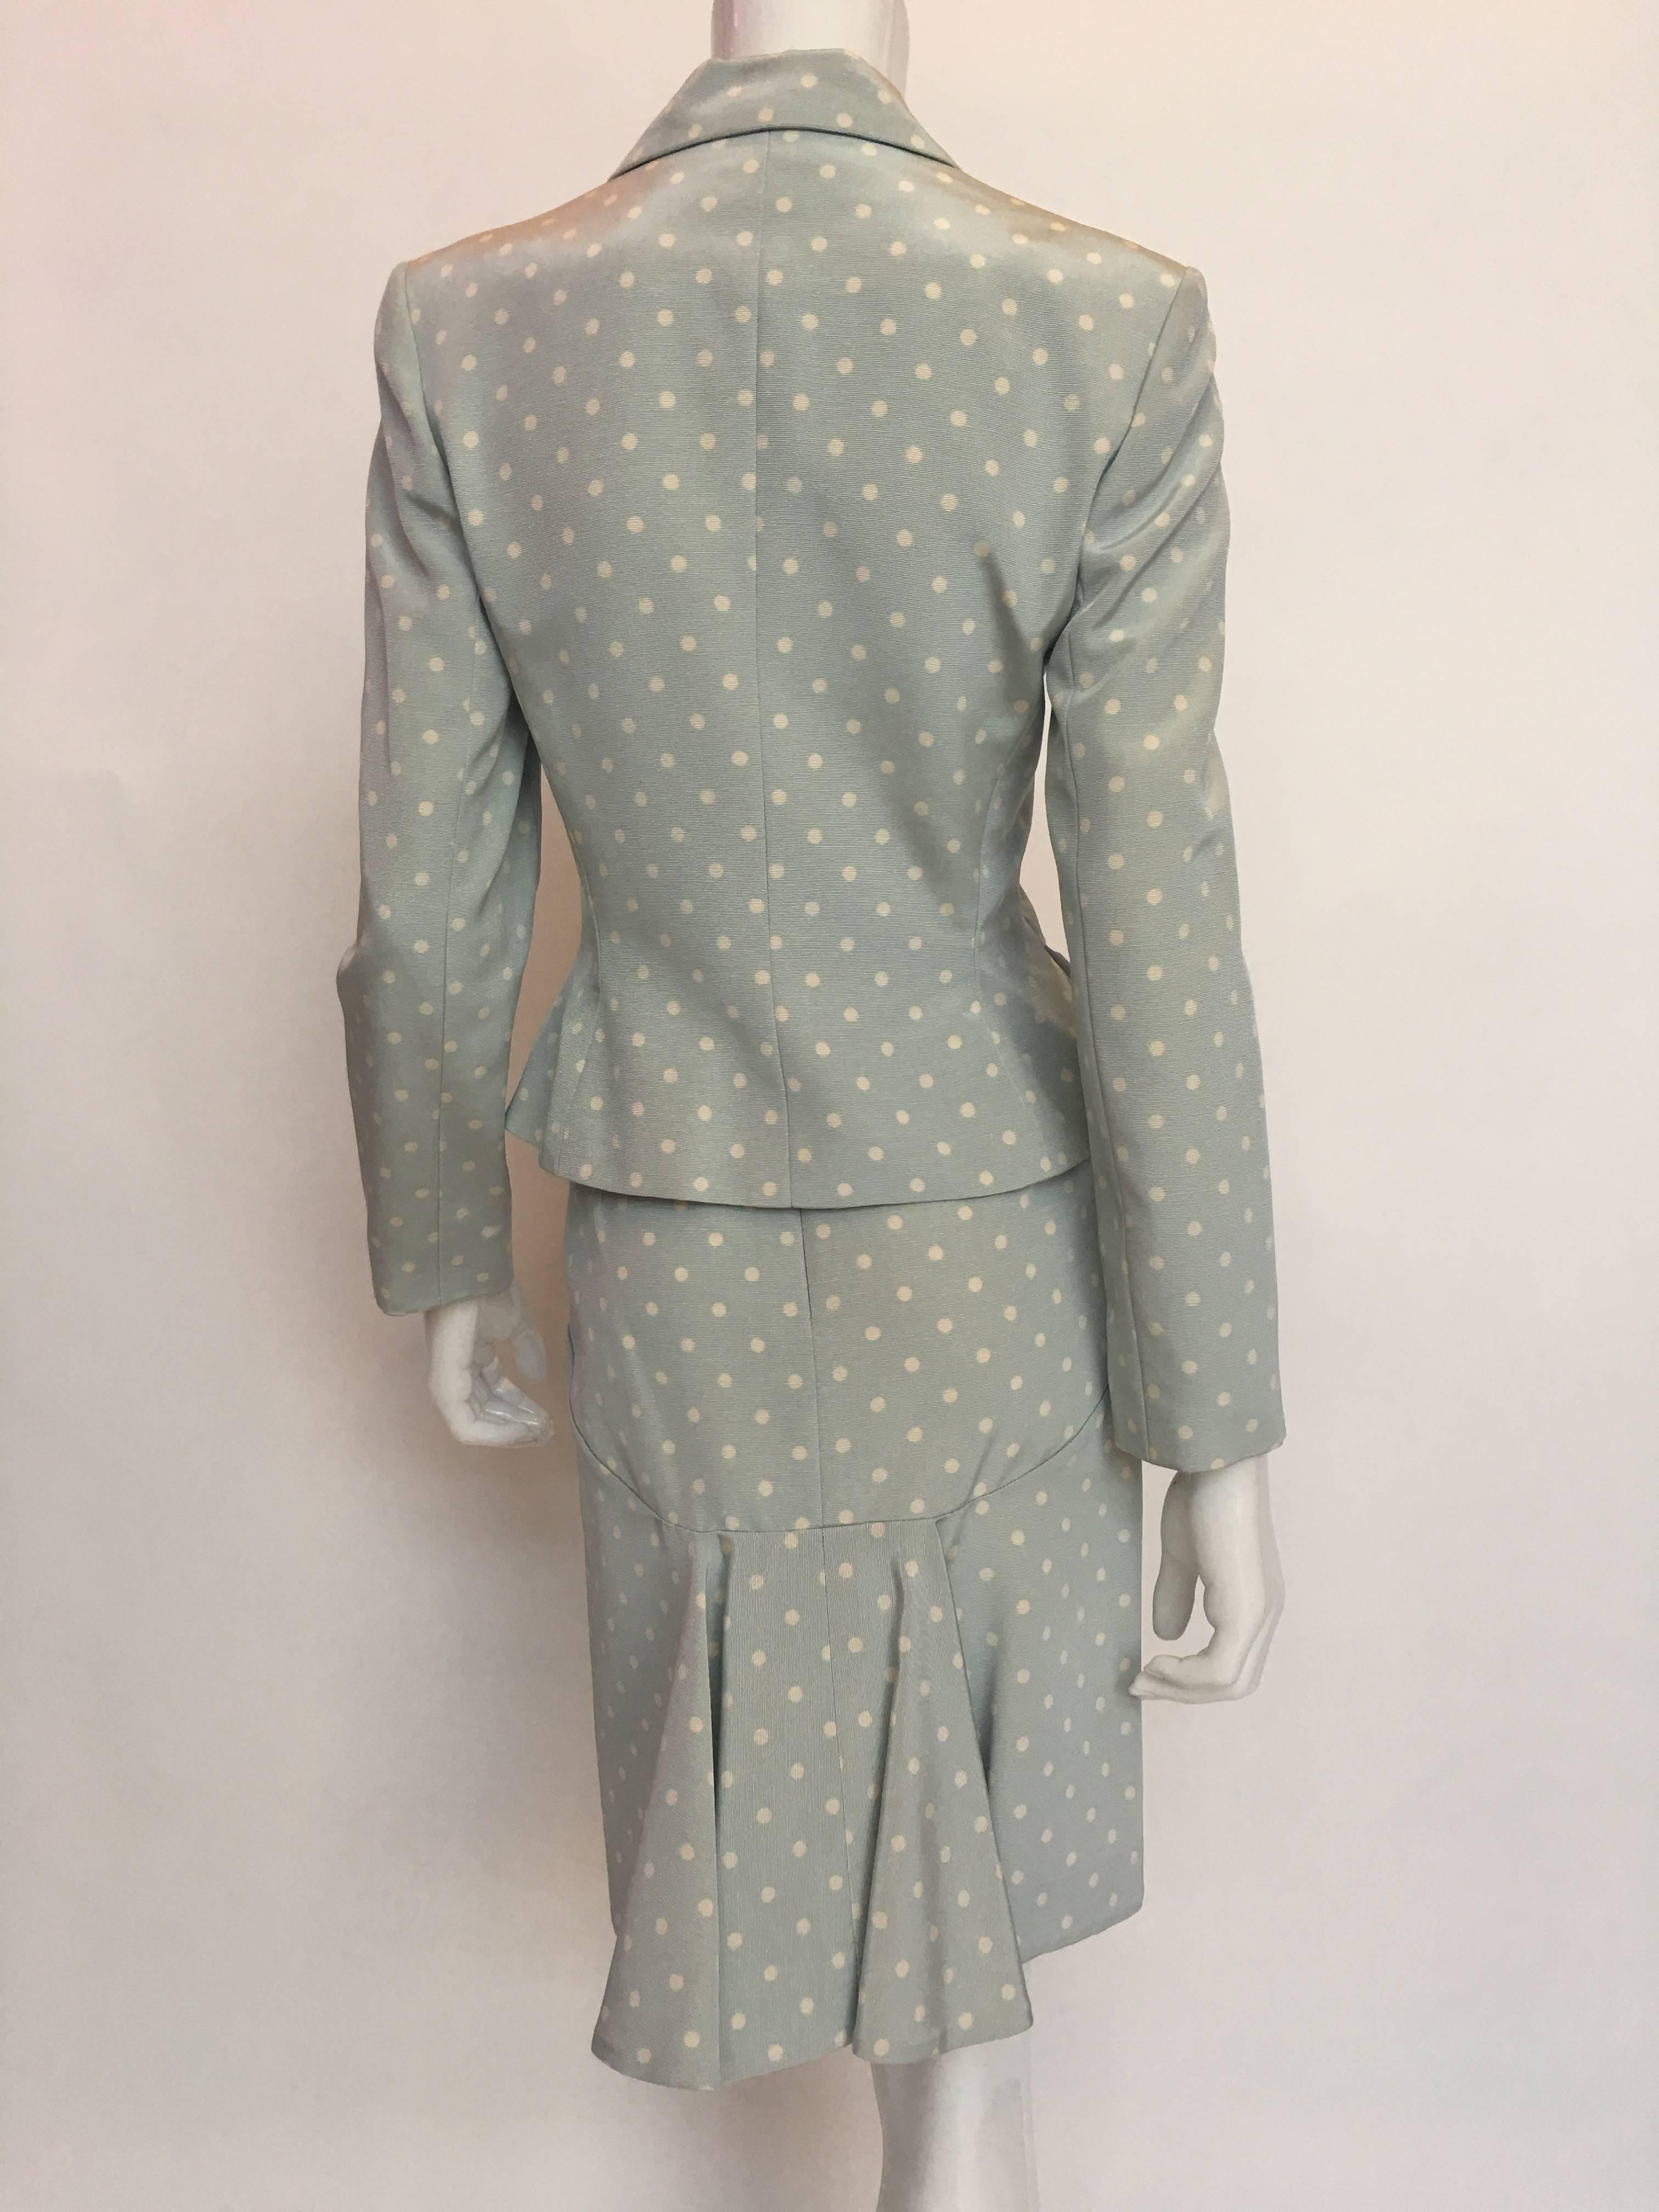 Givenchy 1990's Powder Blue and White Polka Dot Skirt Suit

Measurements - Taken Flat
Jacket:
Shoulders - seam to seam: 16